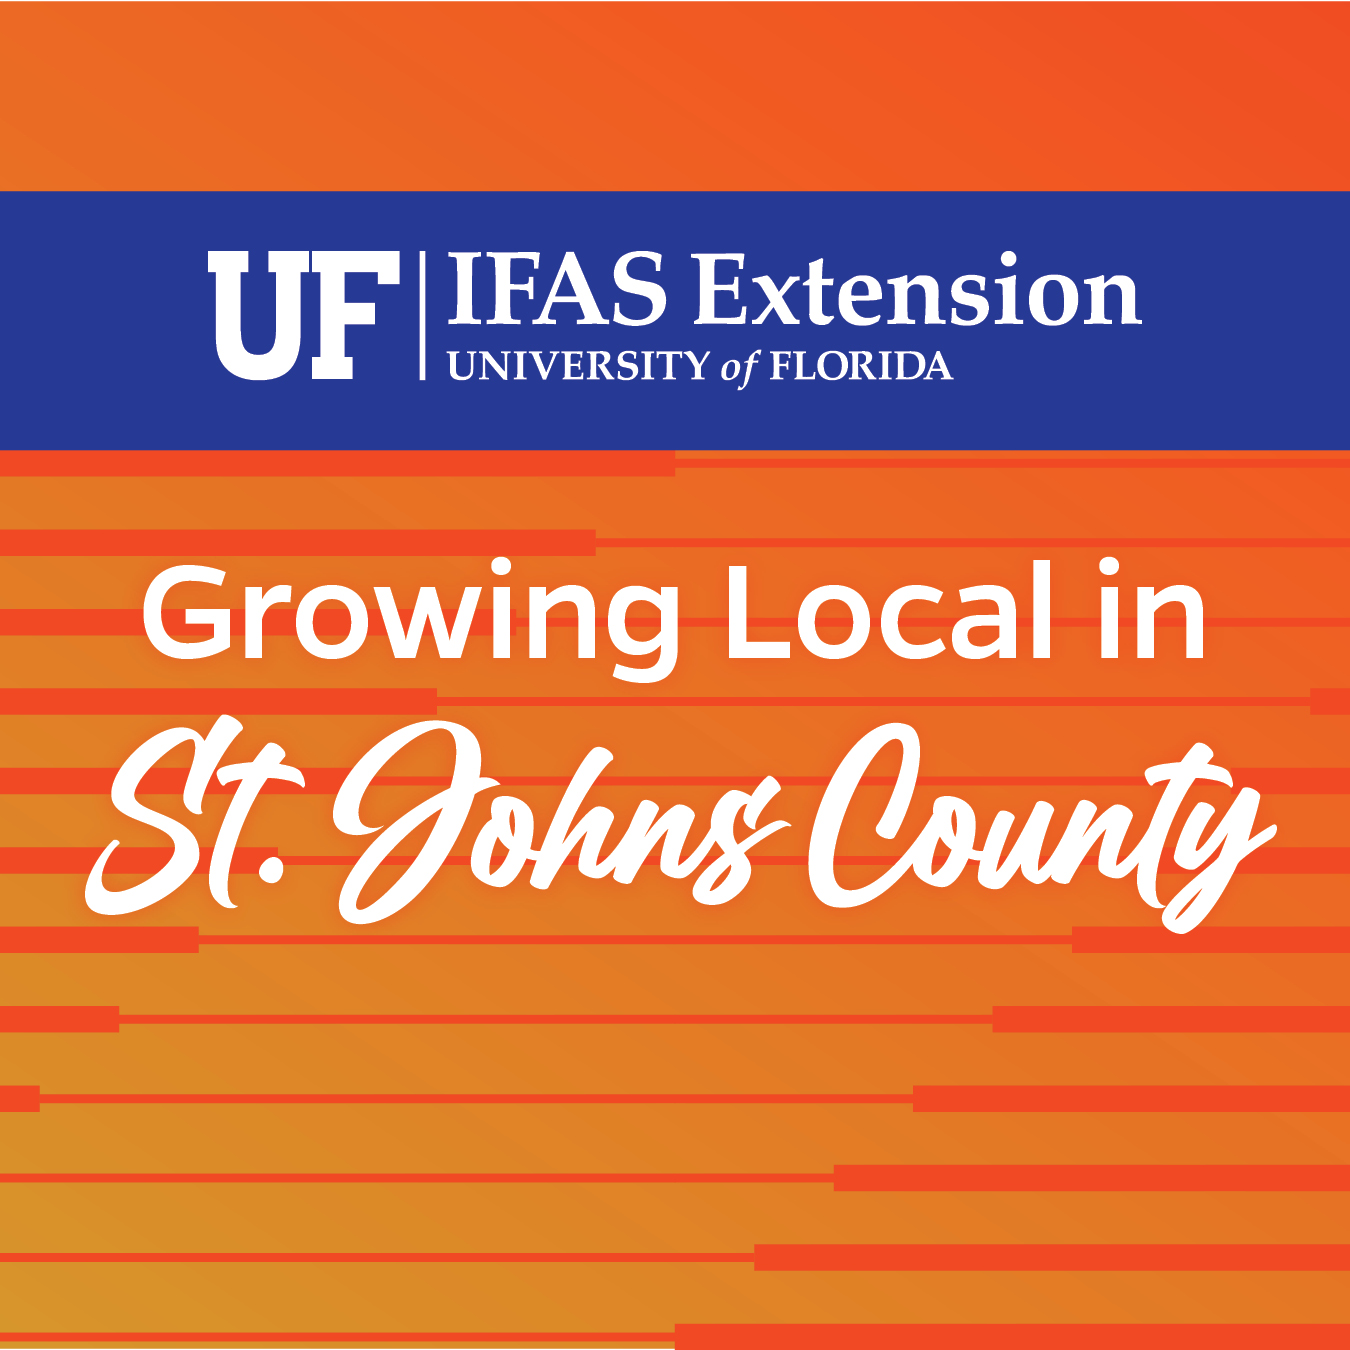 growing-local-in-st-johns-county-a-new-event-in-october-uf-ifas